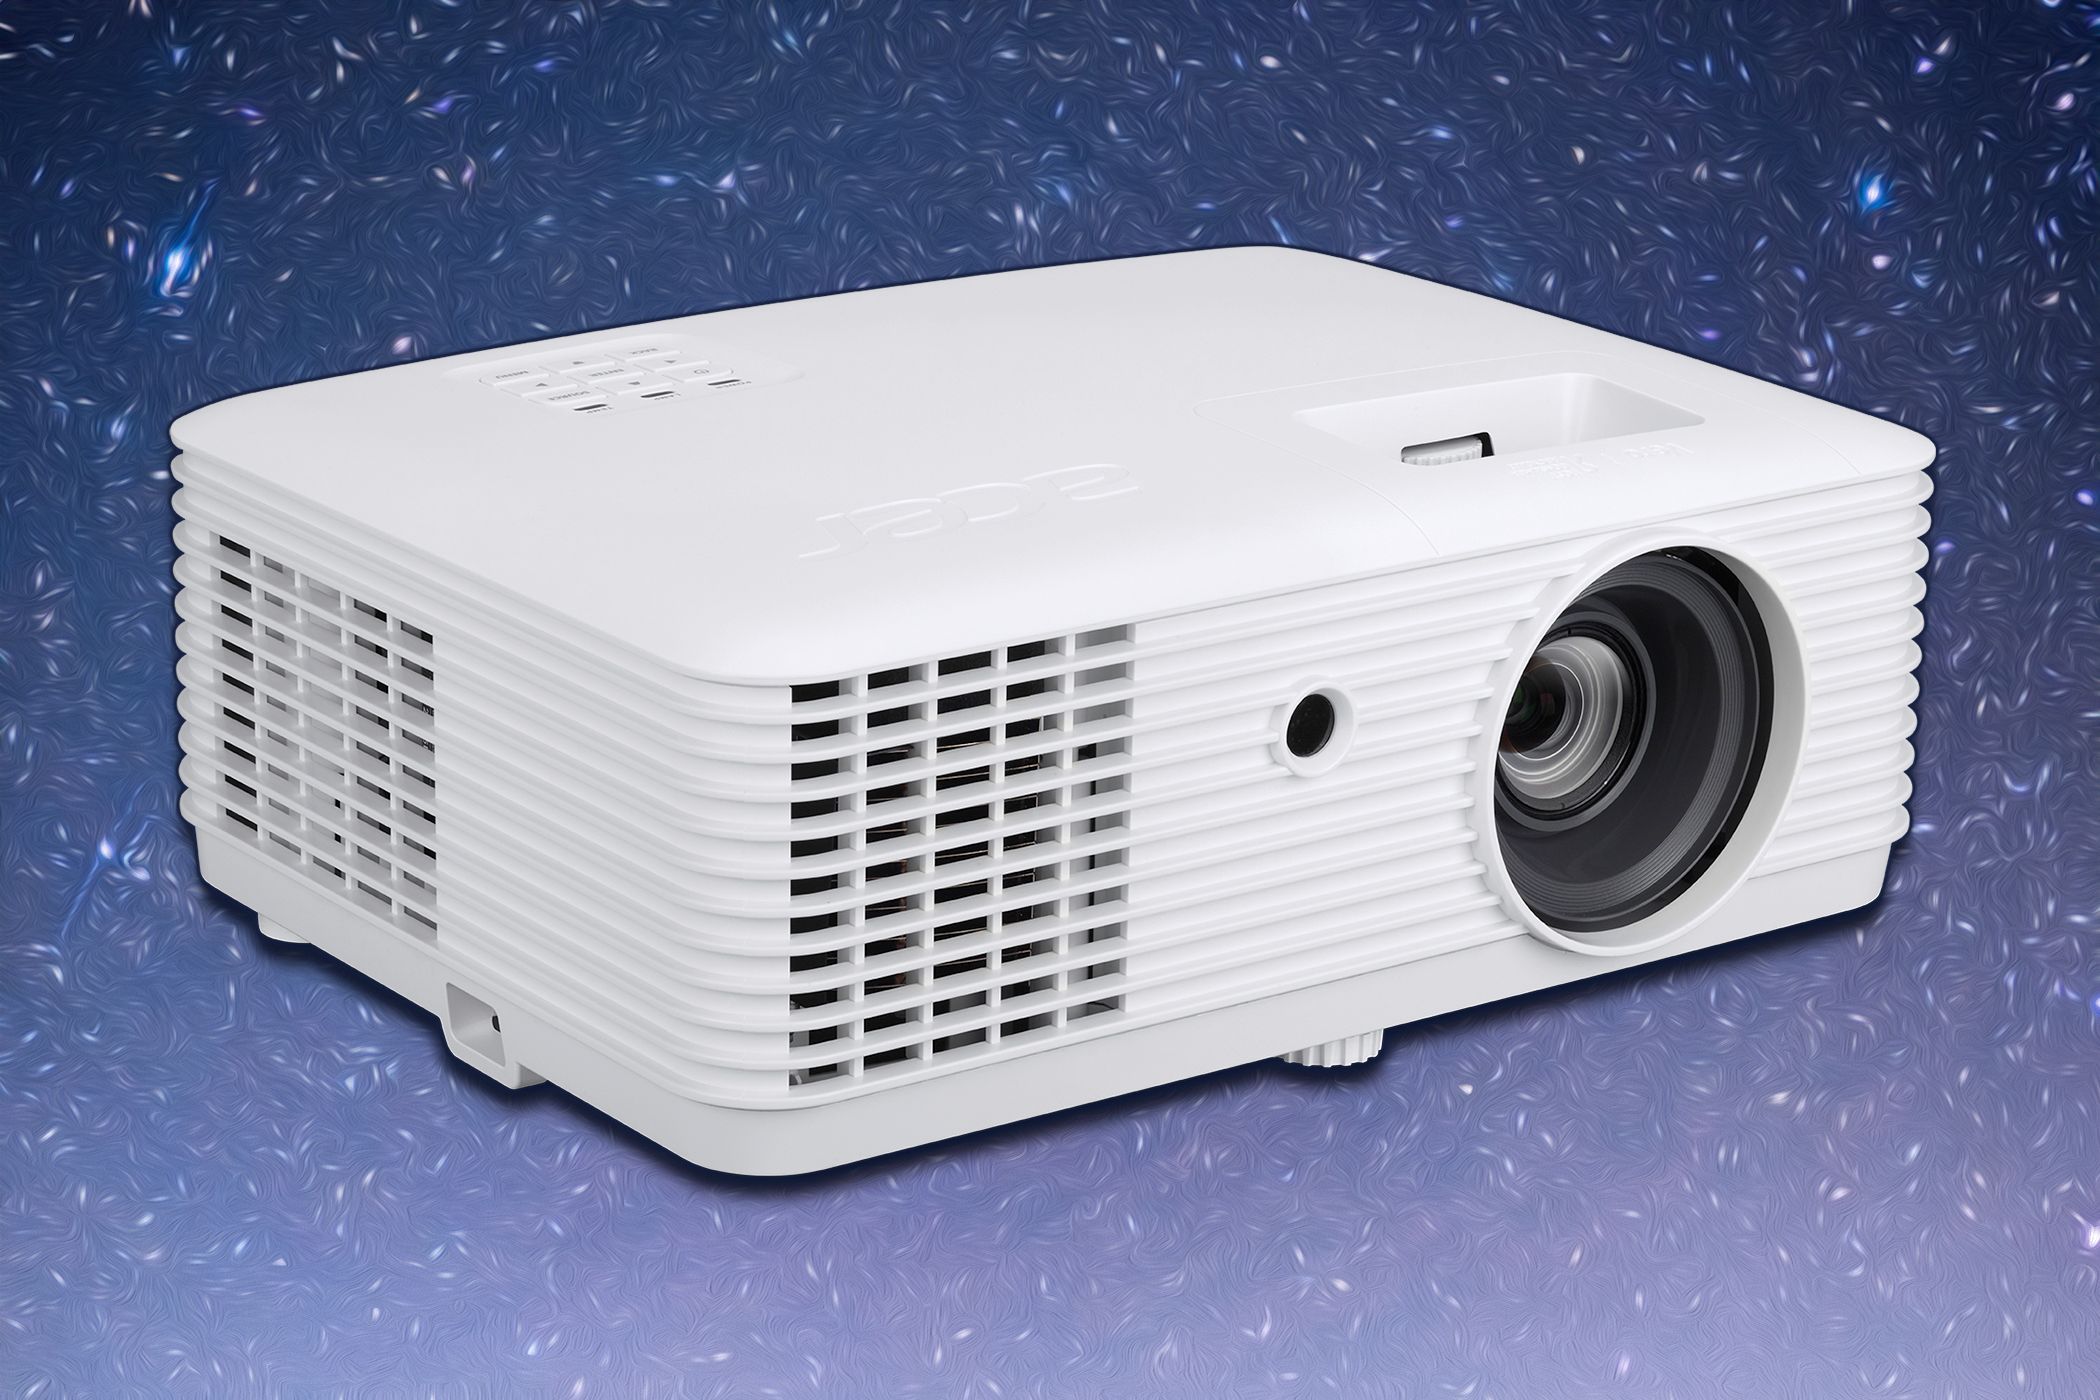 The Acer Vero H6810 laser projector on a starry background.